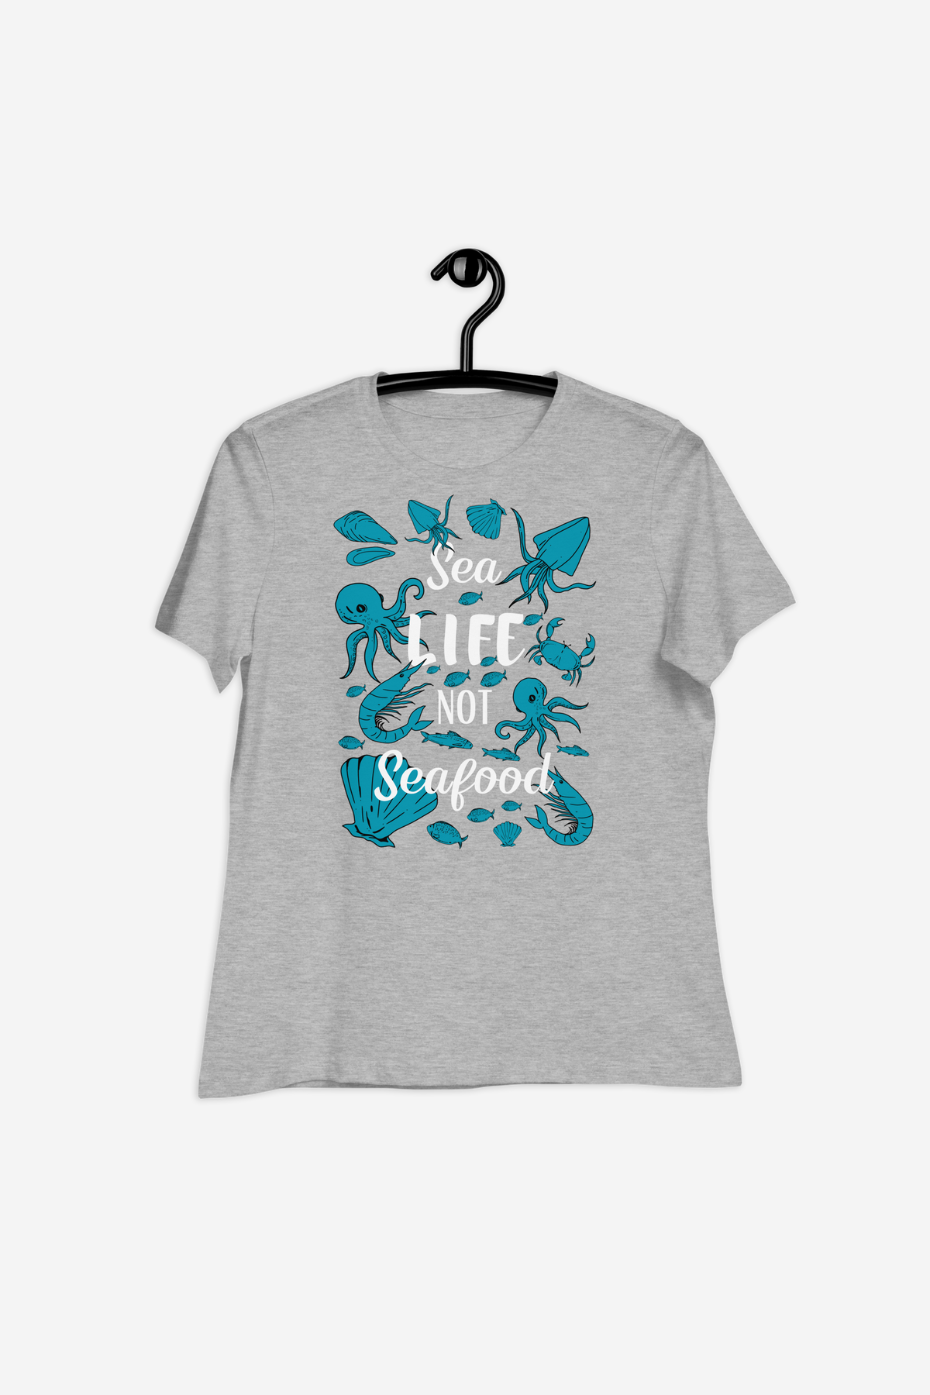 Sea Life Not Seafood Women's Relaxed T-Shirt